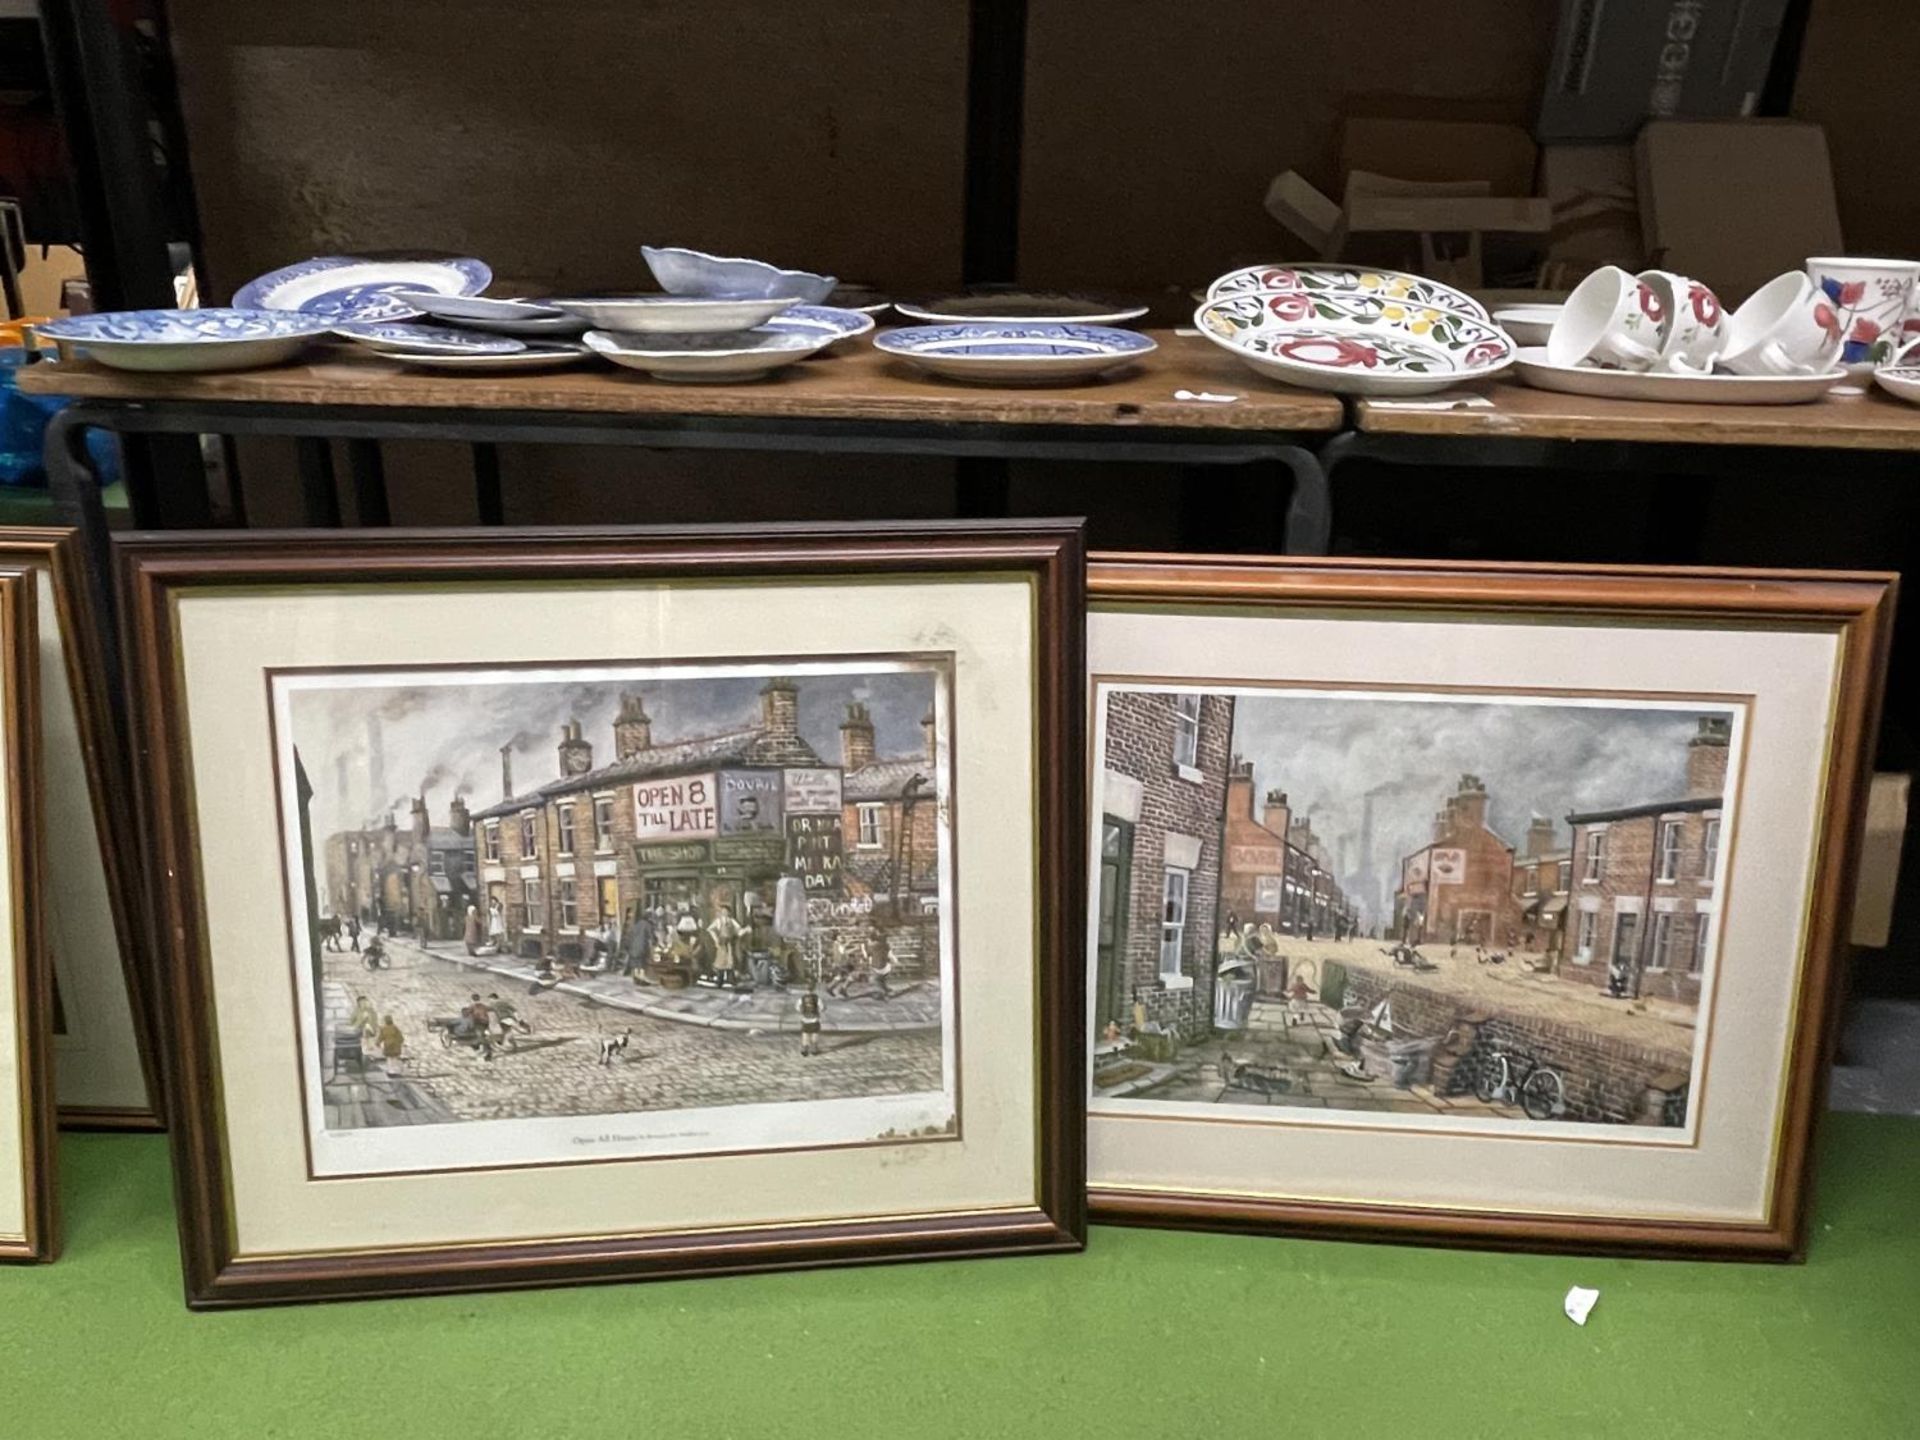 TWO LARGE FRAMED LIMITED EDITION PRINTS BY BERNARD McMULLEN ONE ENTITLED "OPEN ALL HOURS"